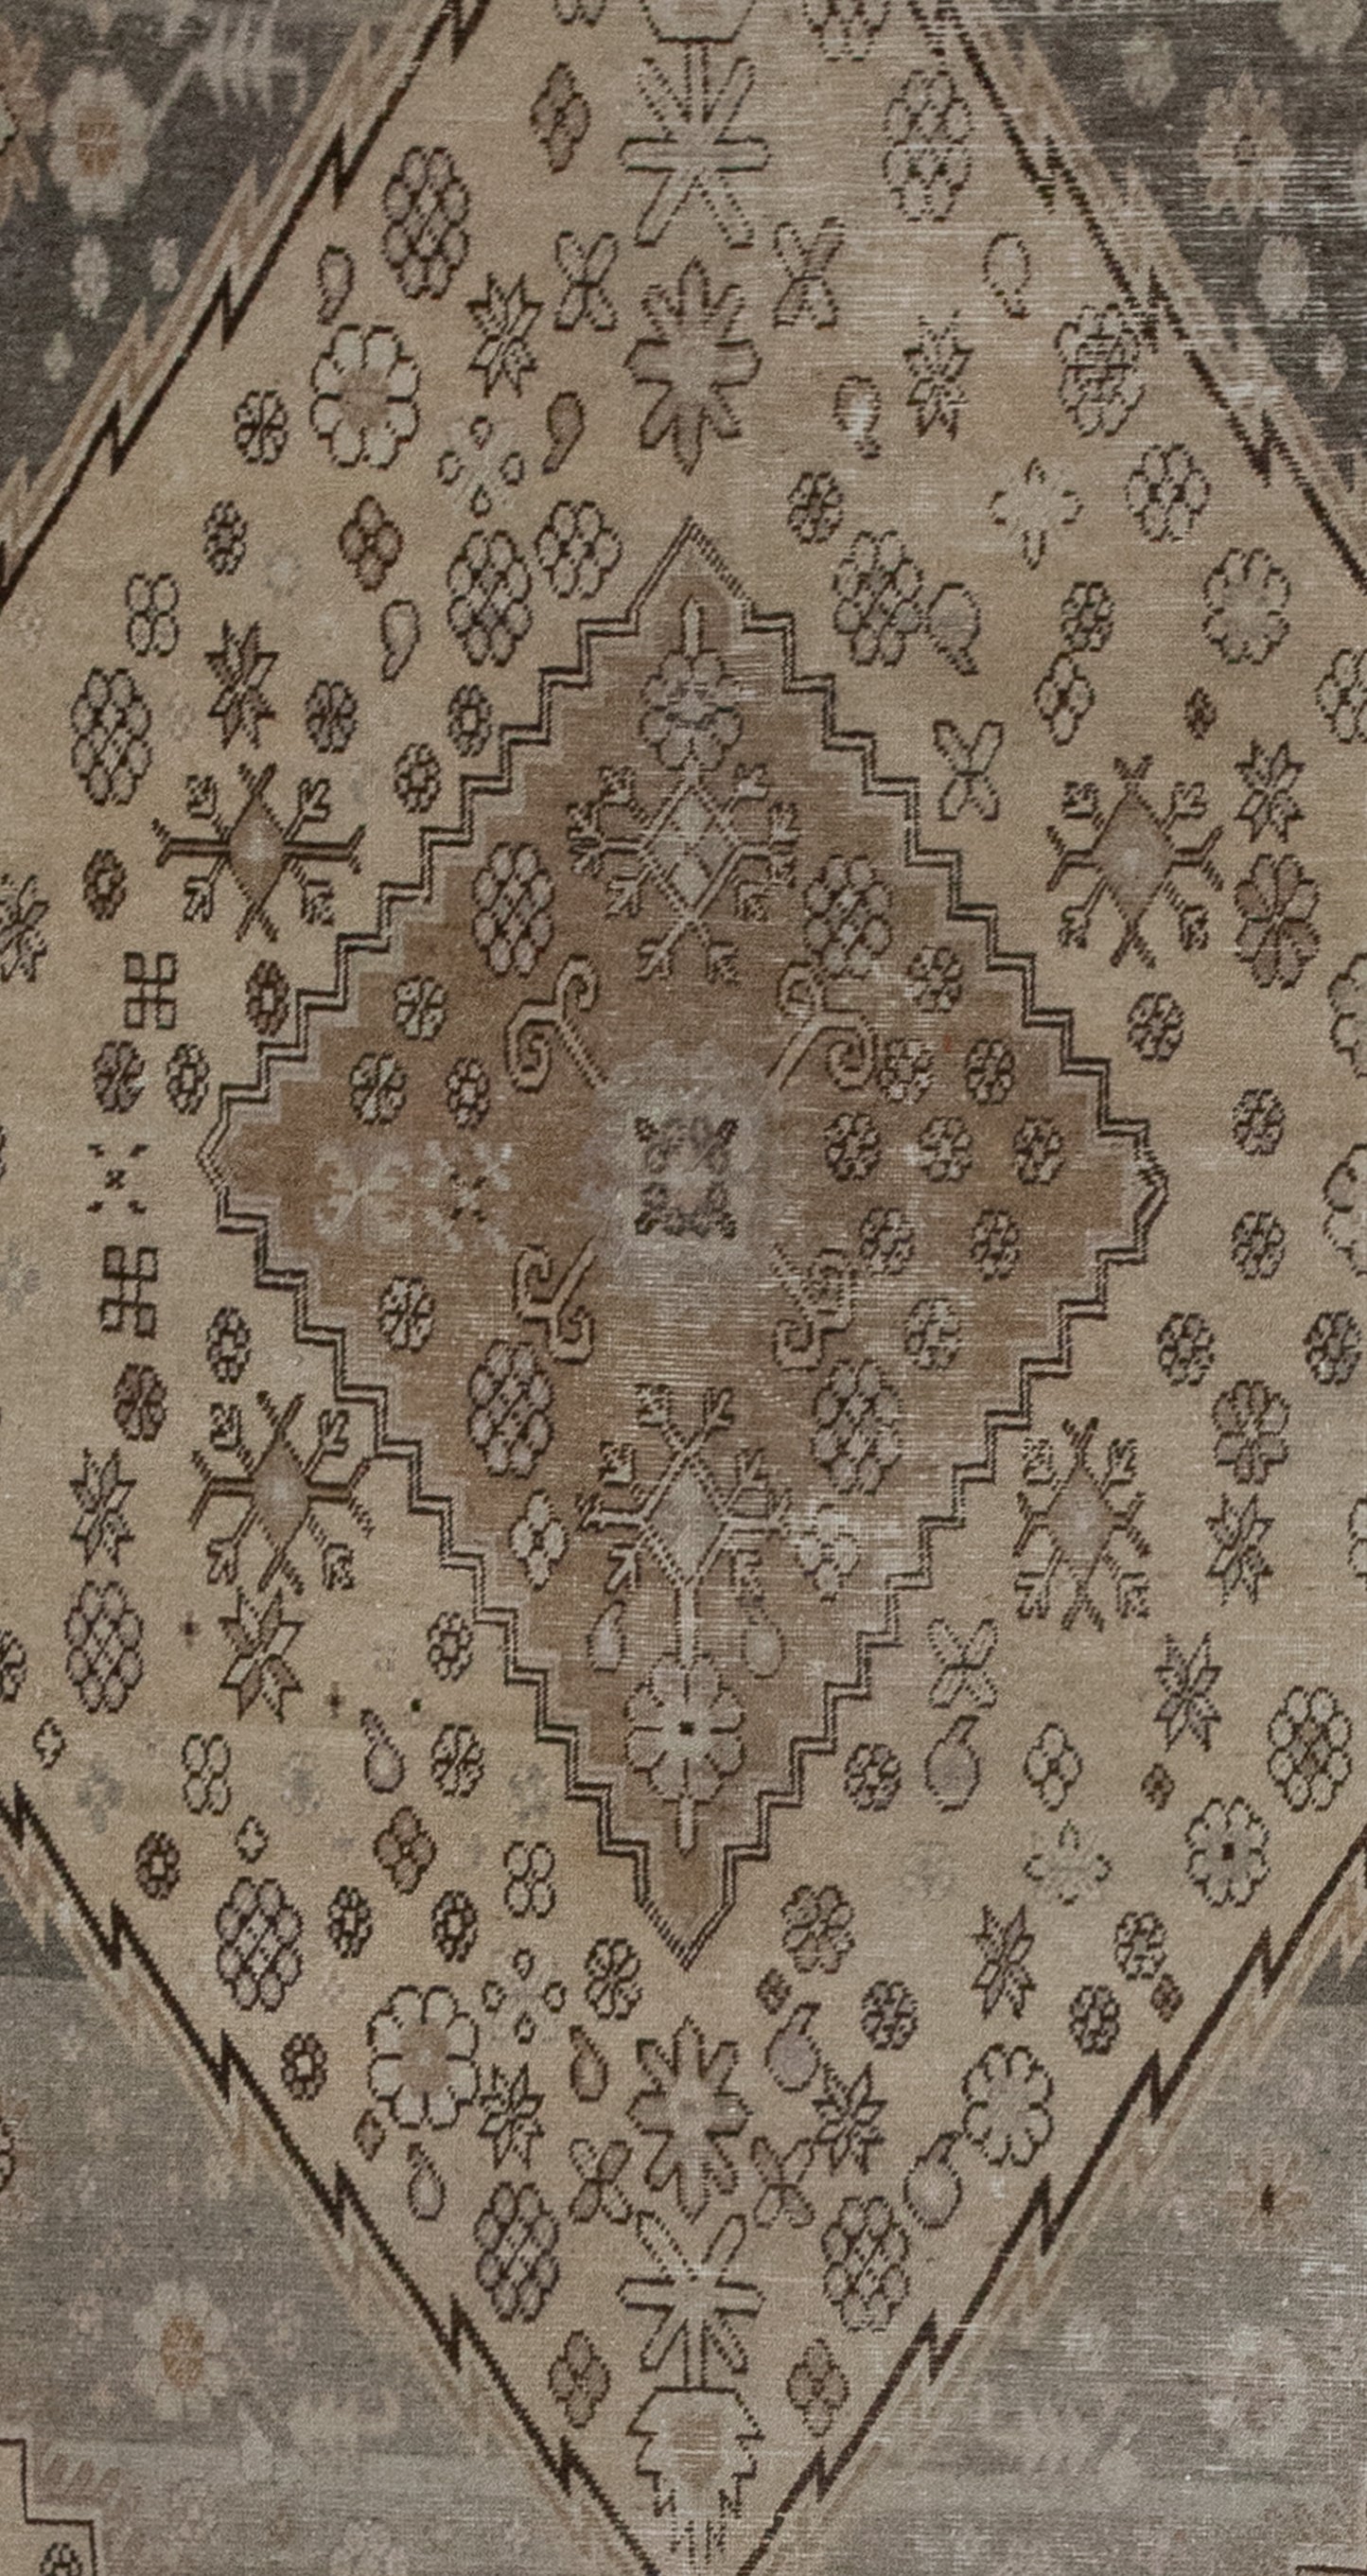 The center of the rug shows a diamond shape full of small flowers and ornaments.